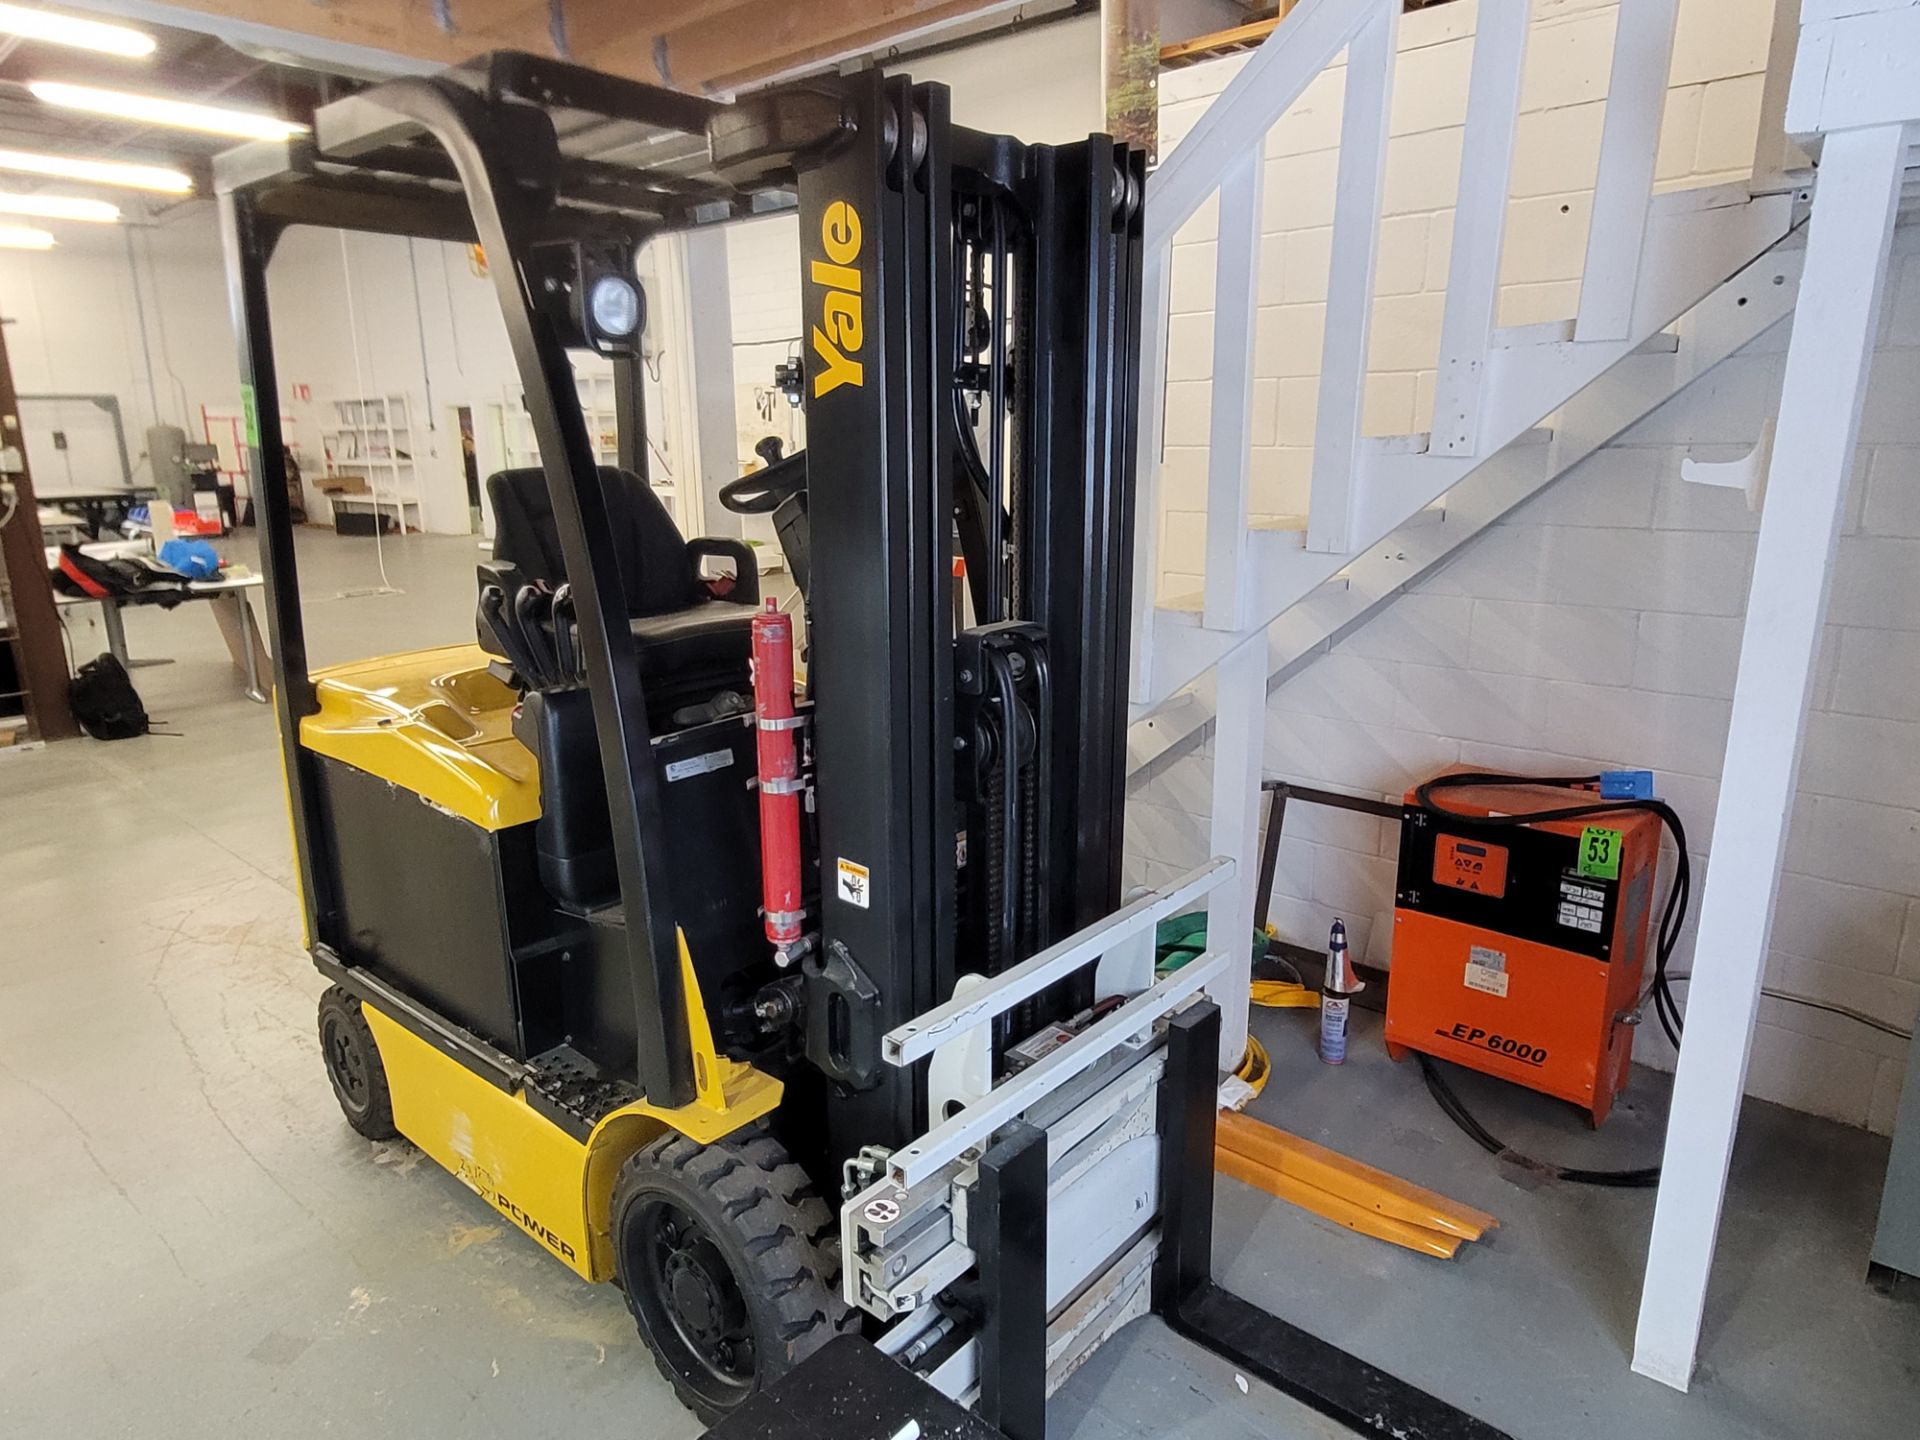 YALE Forklift mod. ERCO050VGN48TE85, 4200lbs cap., 48V, 17' H, 4900hrs, ser. A968N04749 with battery - Image 18 of 30